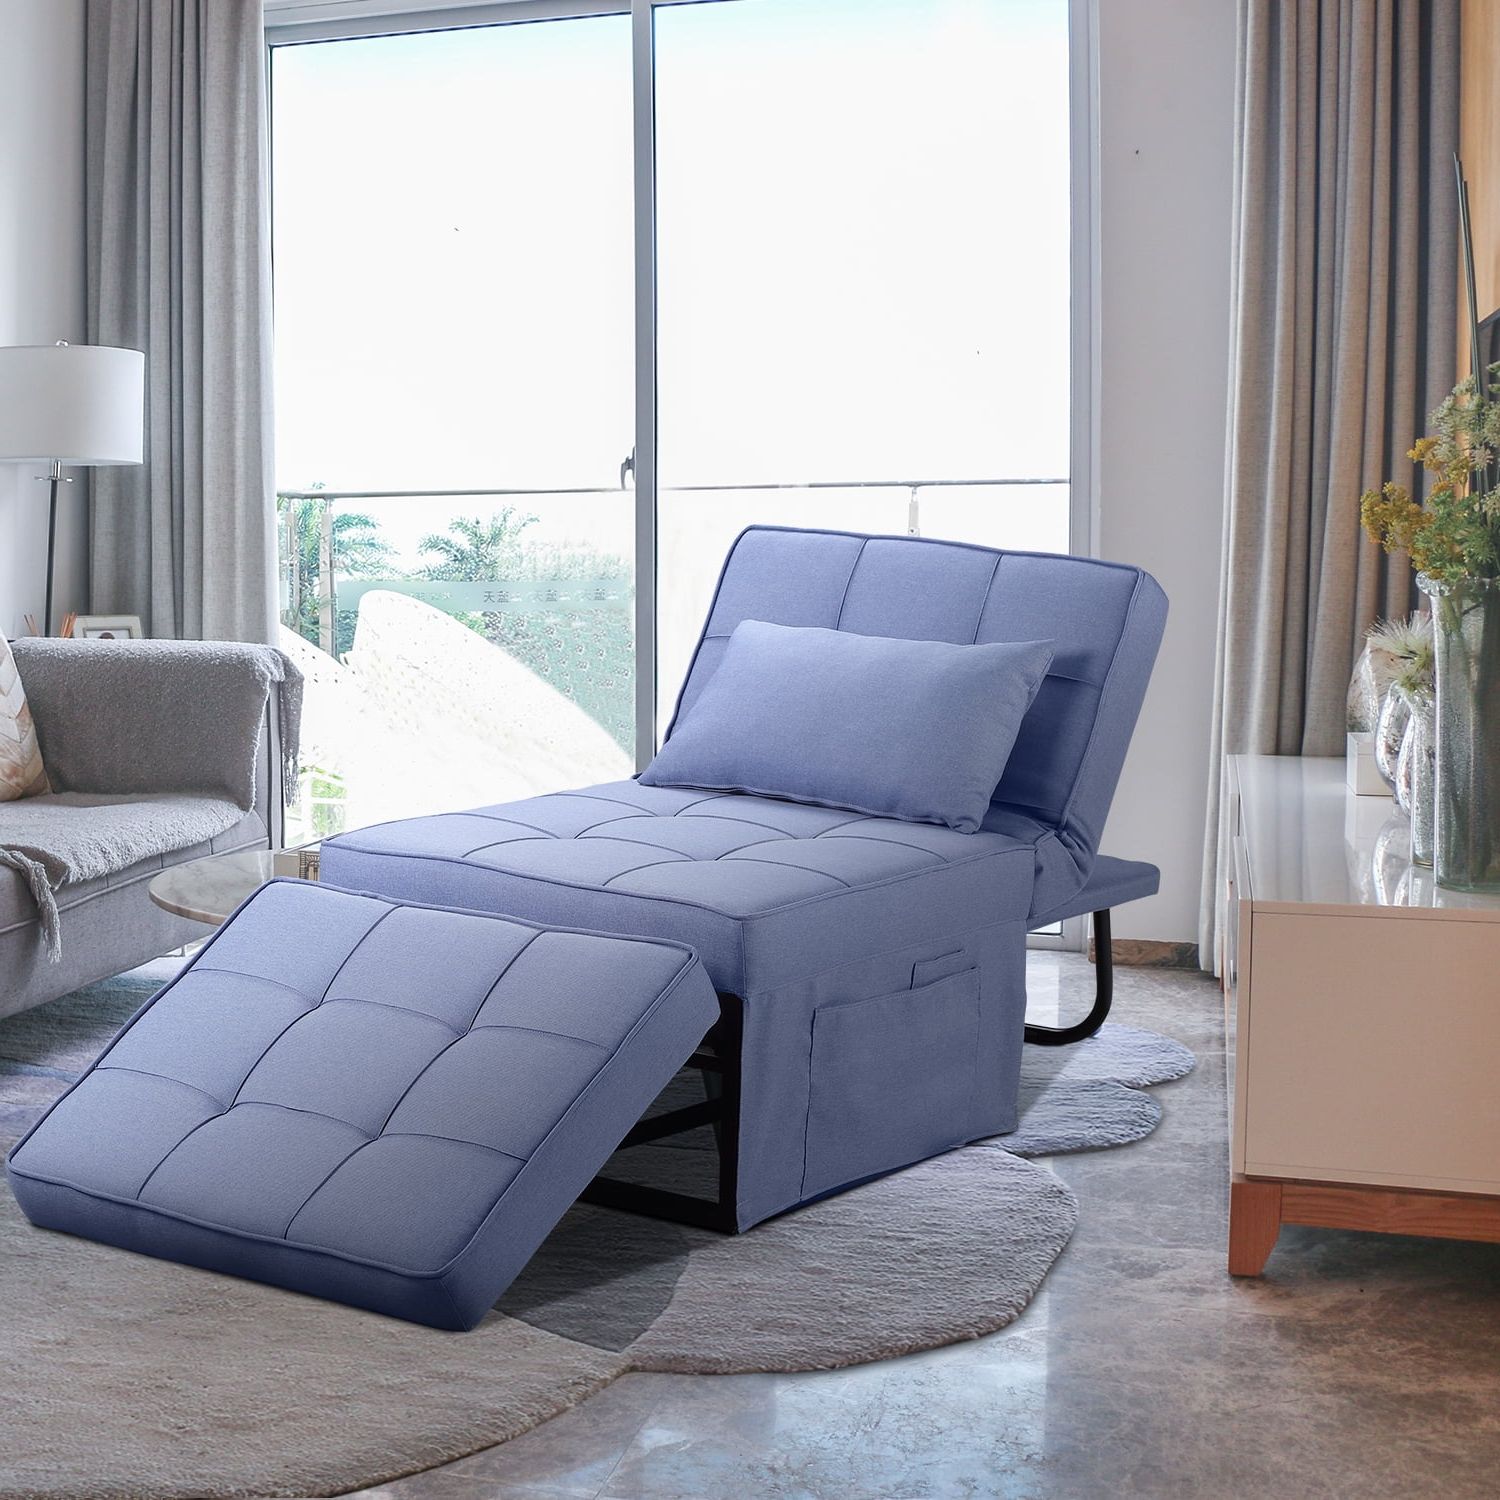 Featured Photo of The 20 Best Collection of 4-in-1 Convertible Sleeper Chair Beds